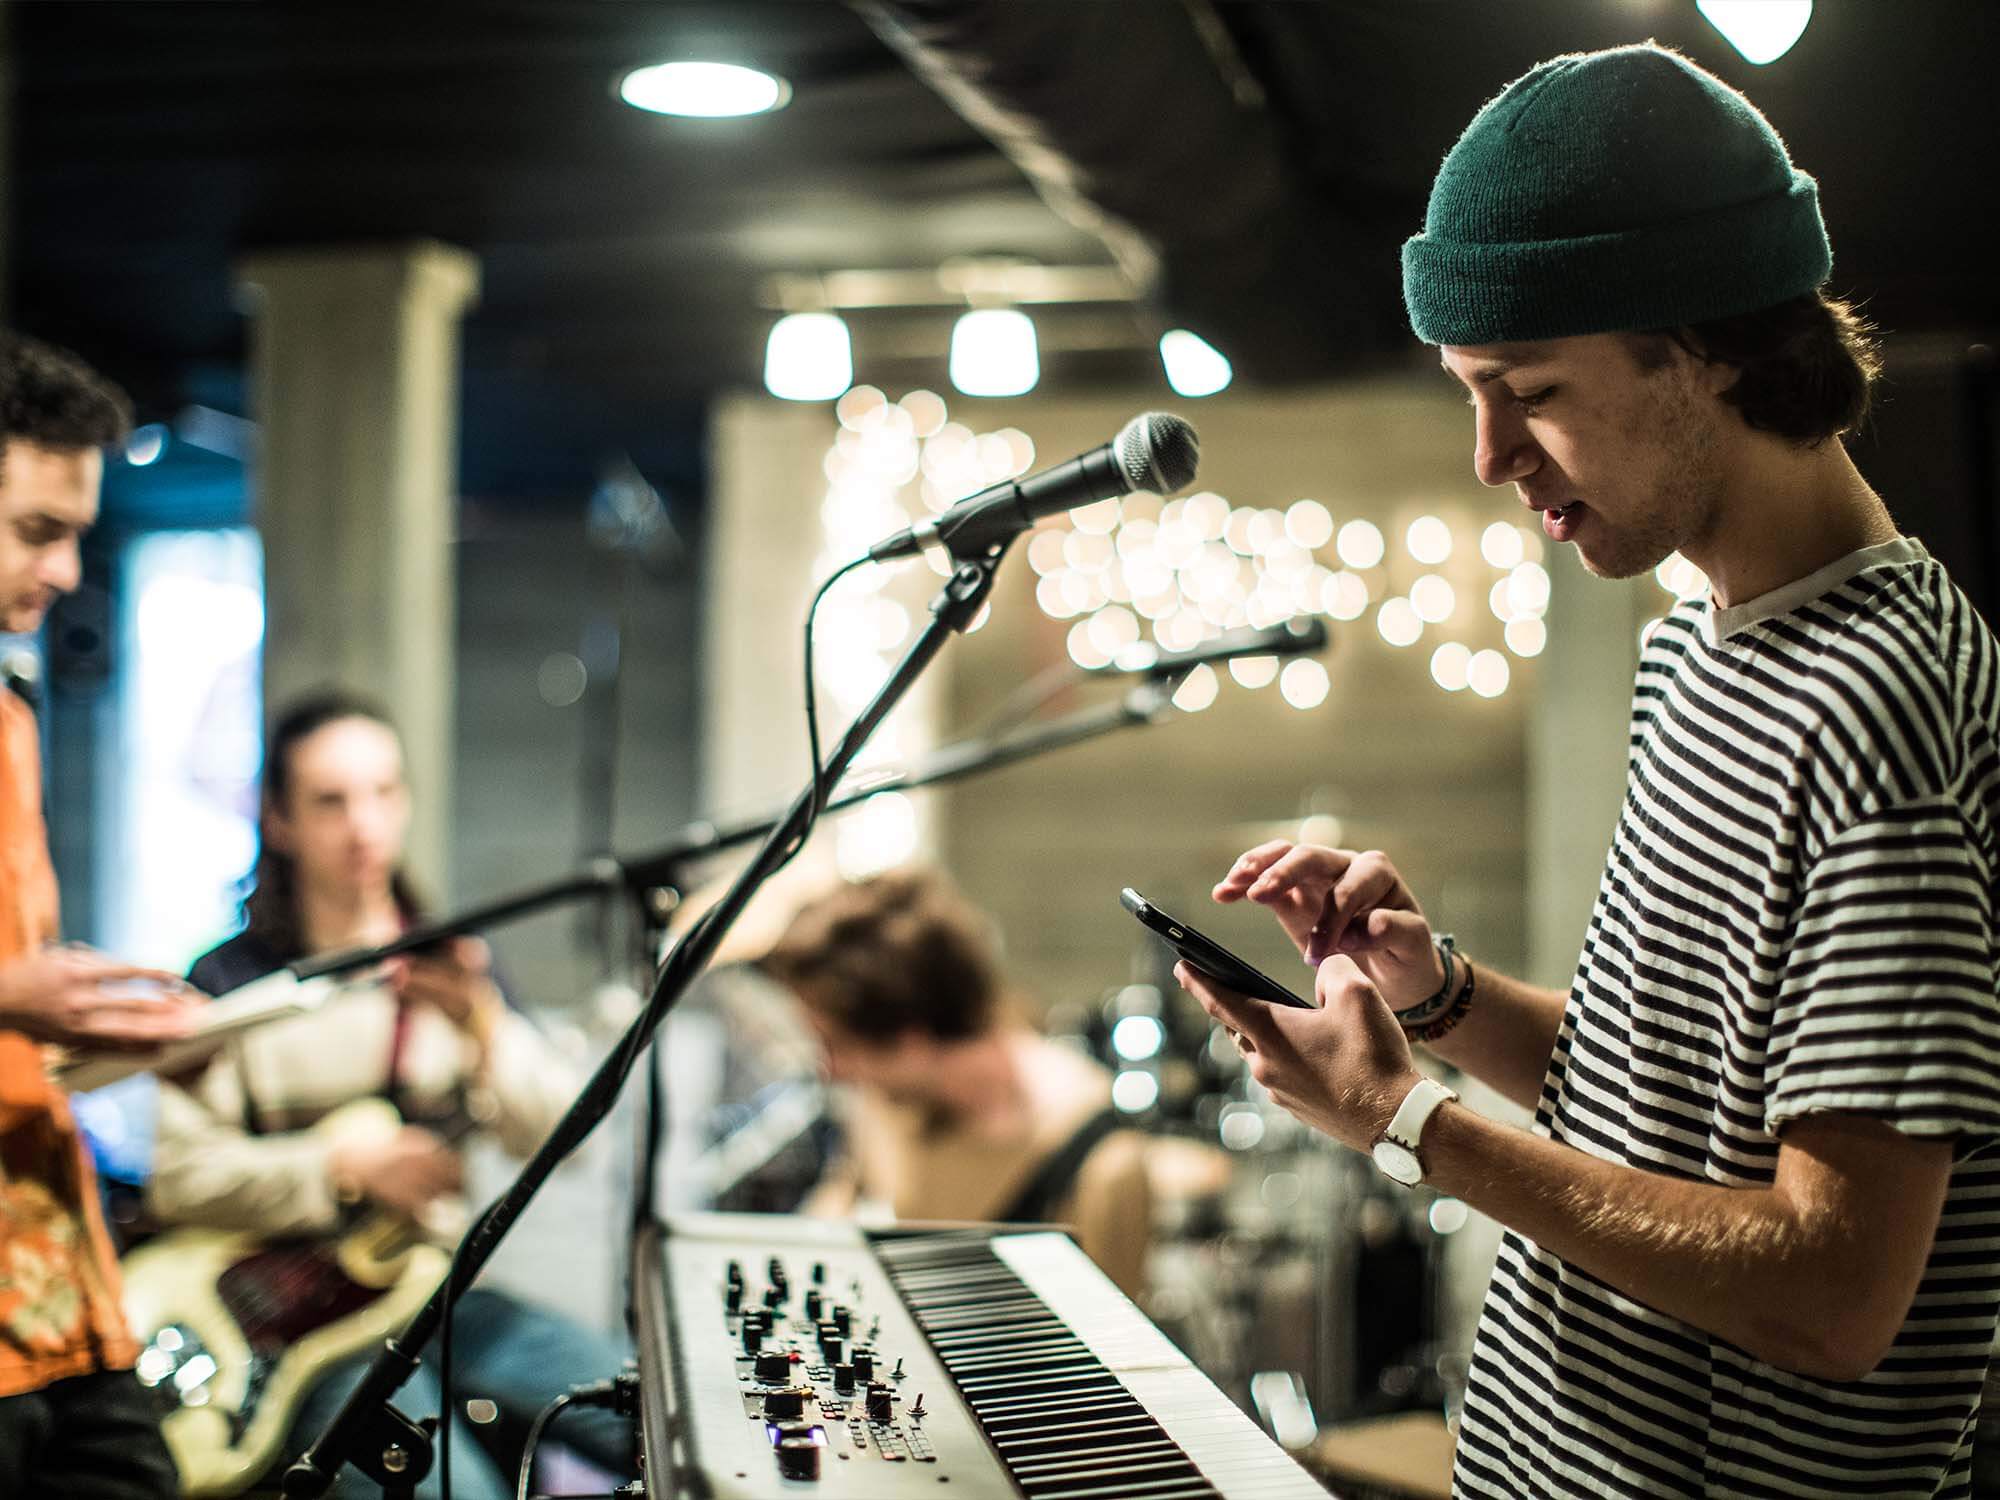 Keyboard player uses mobile phone at band practice